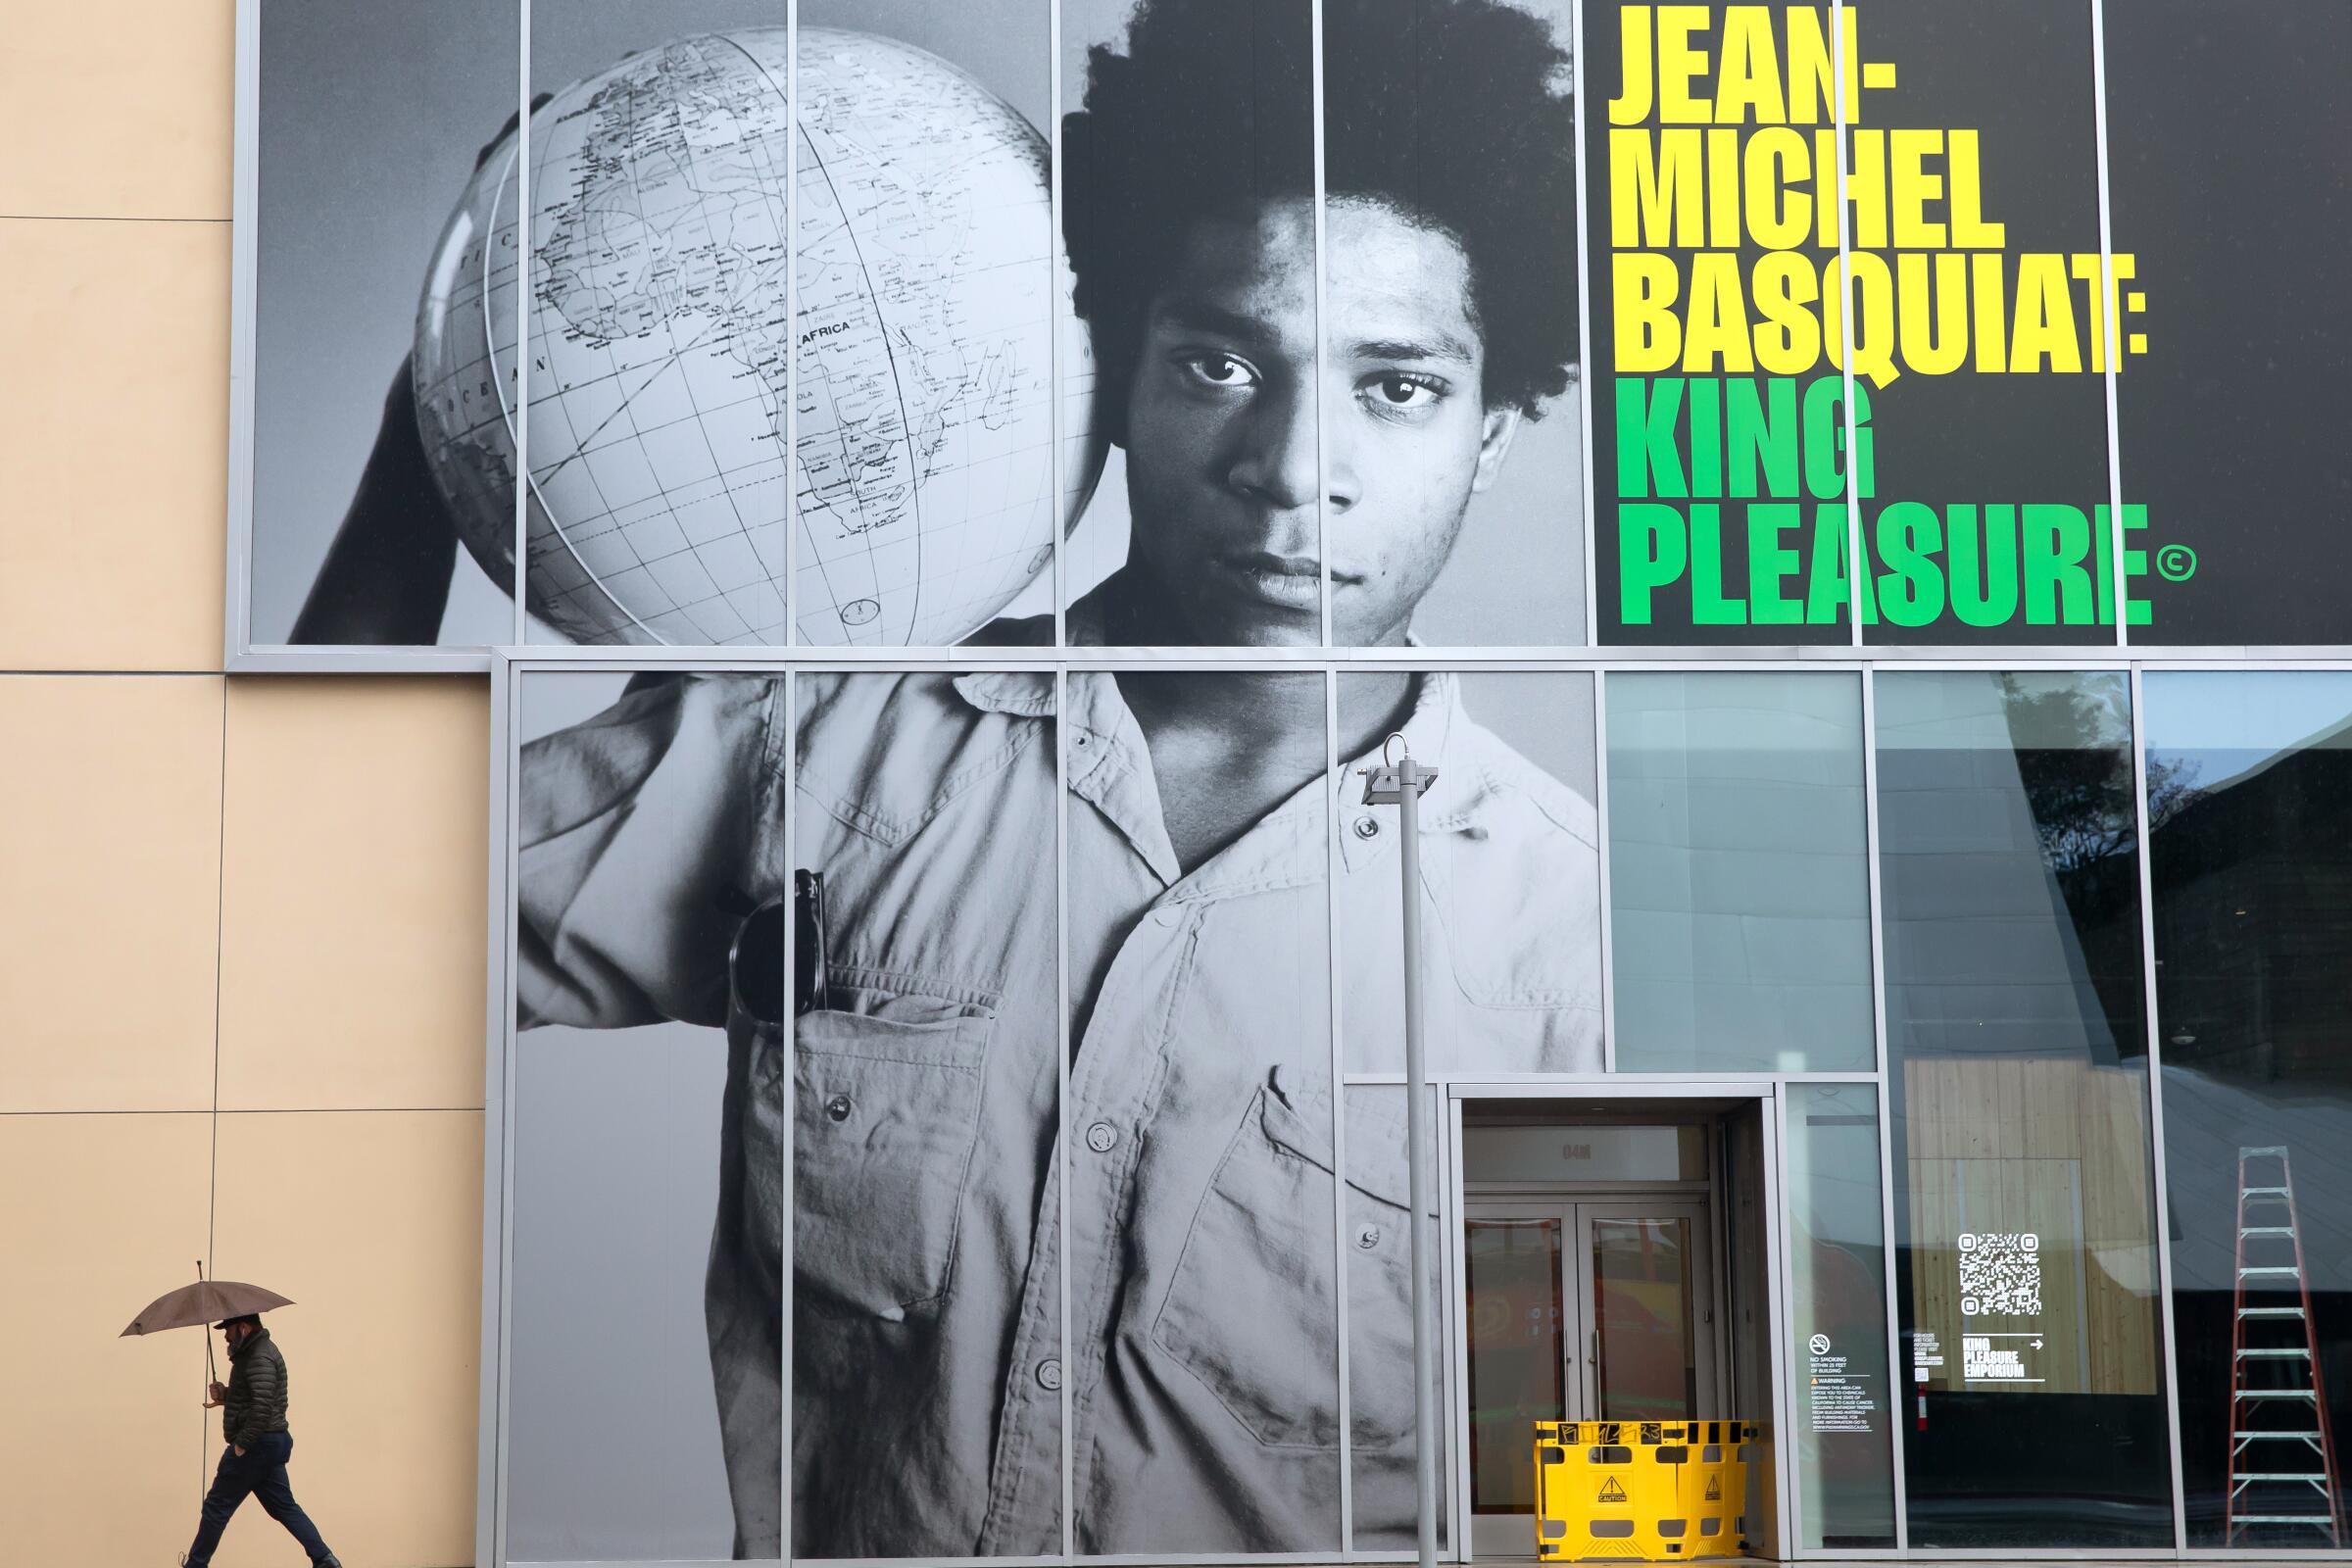 The 10 Most Expensive Jean-Michel Basquiat Works Ever Sold at